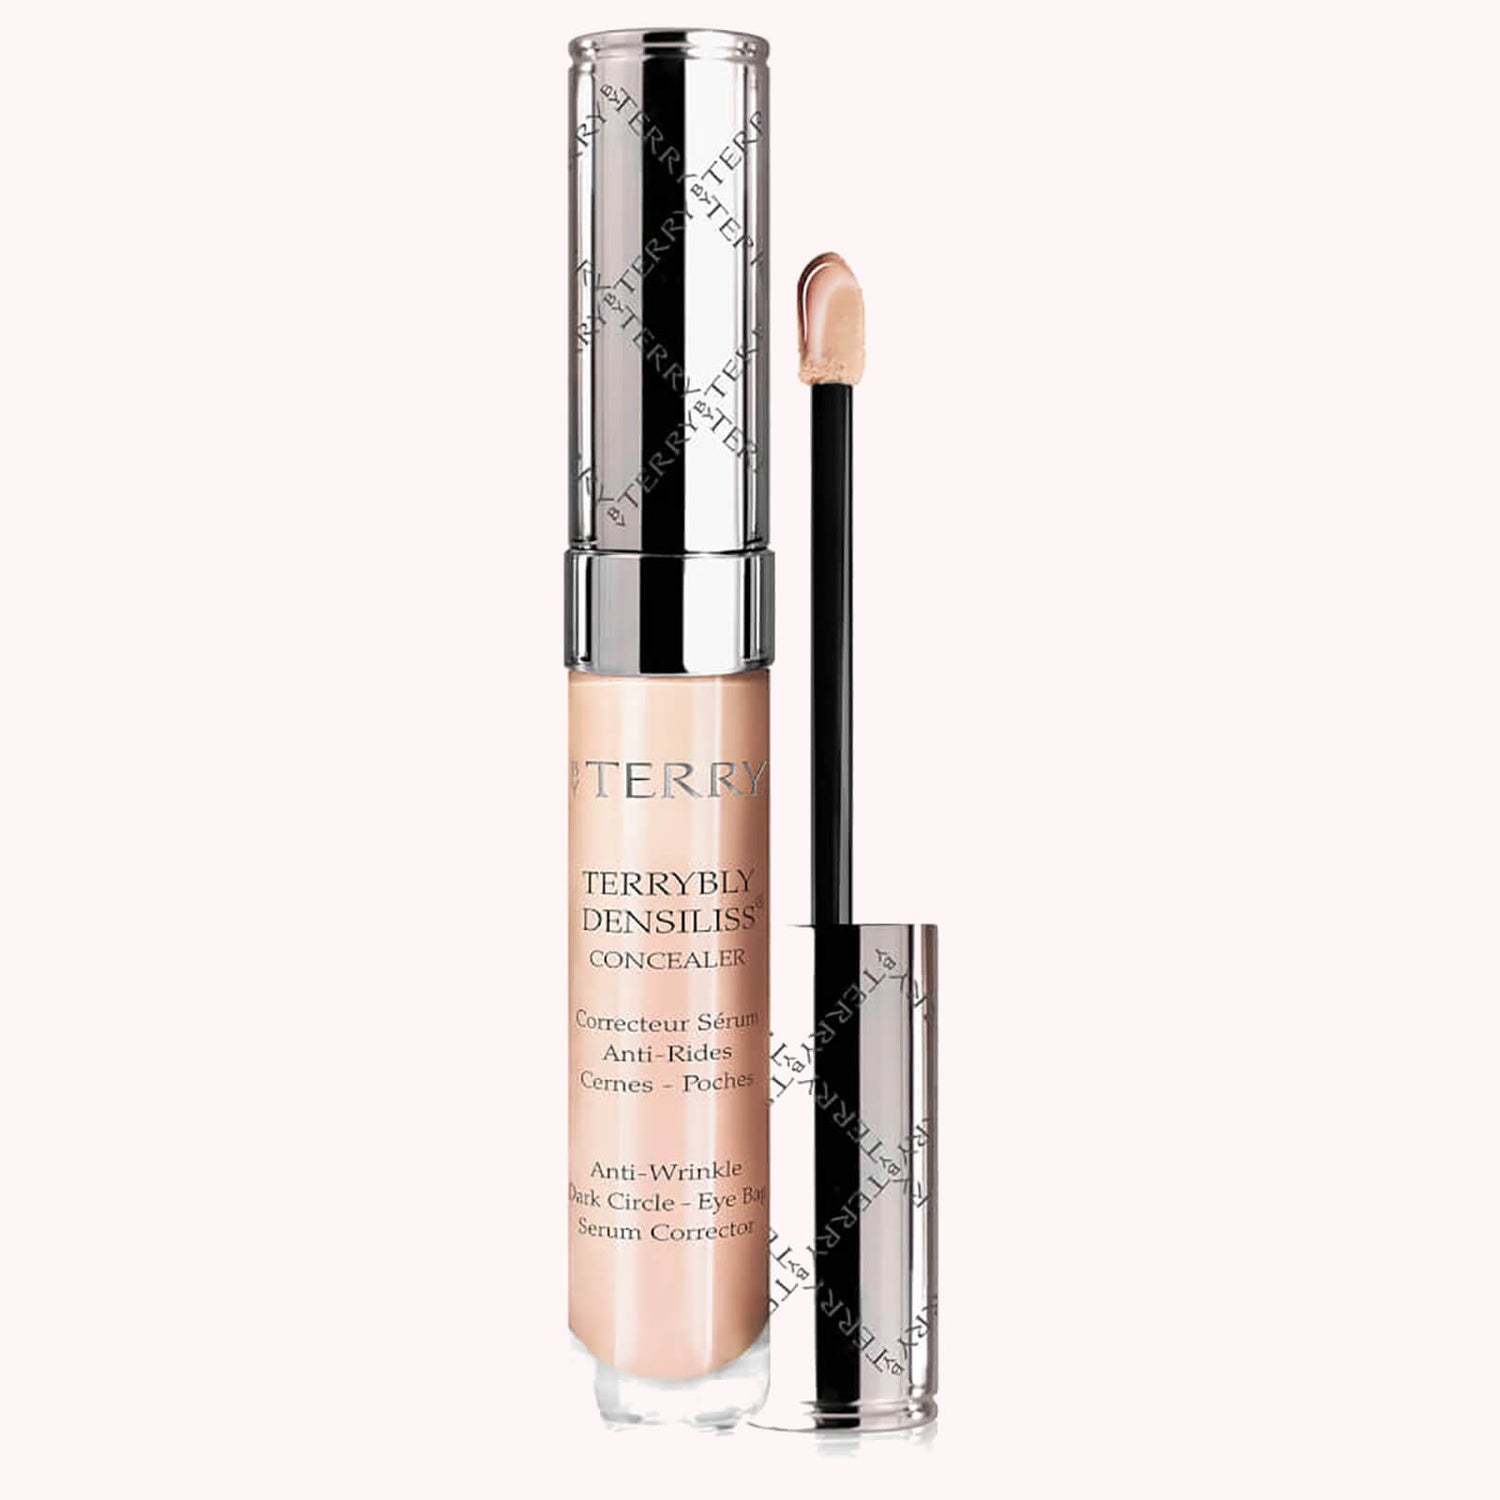 BY TERRY Terrybly Densiliss Concealer 7 ml.